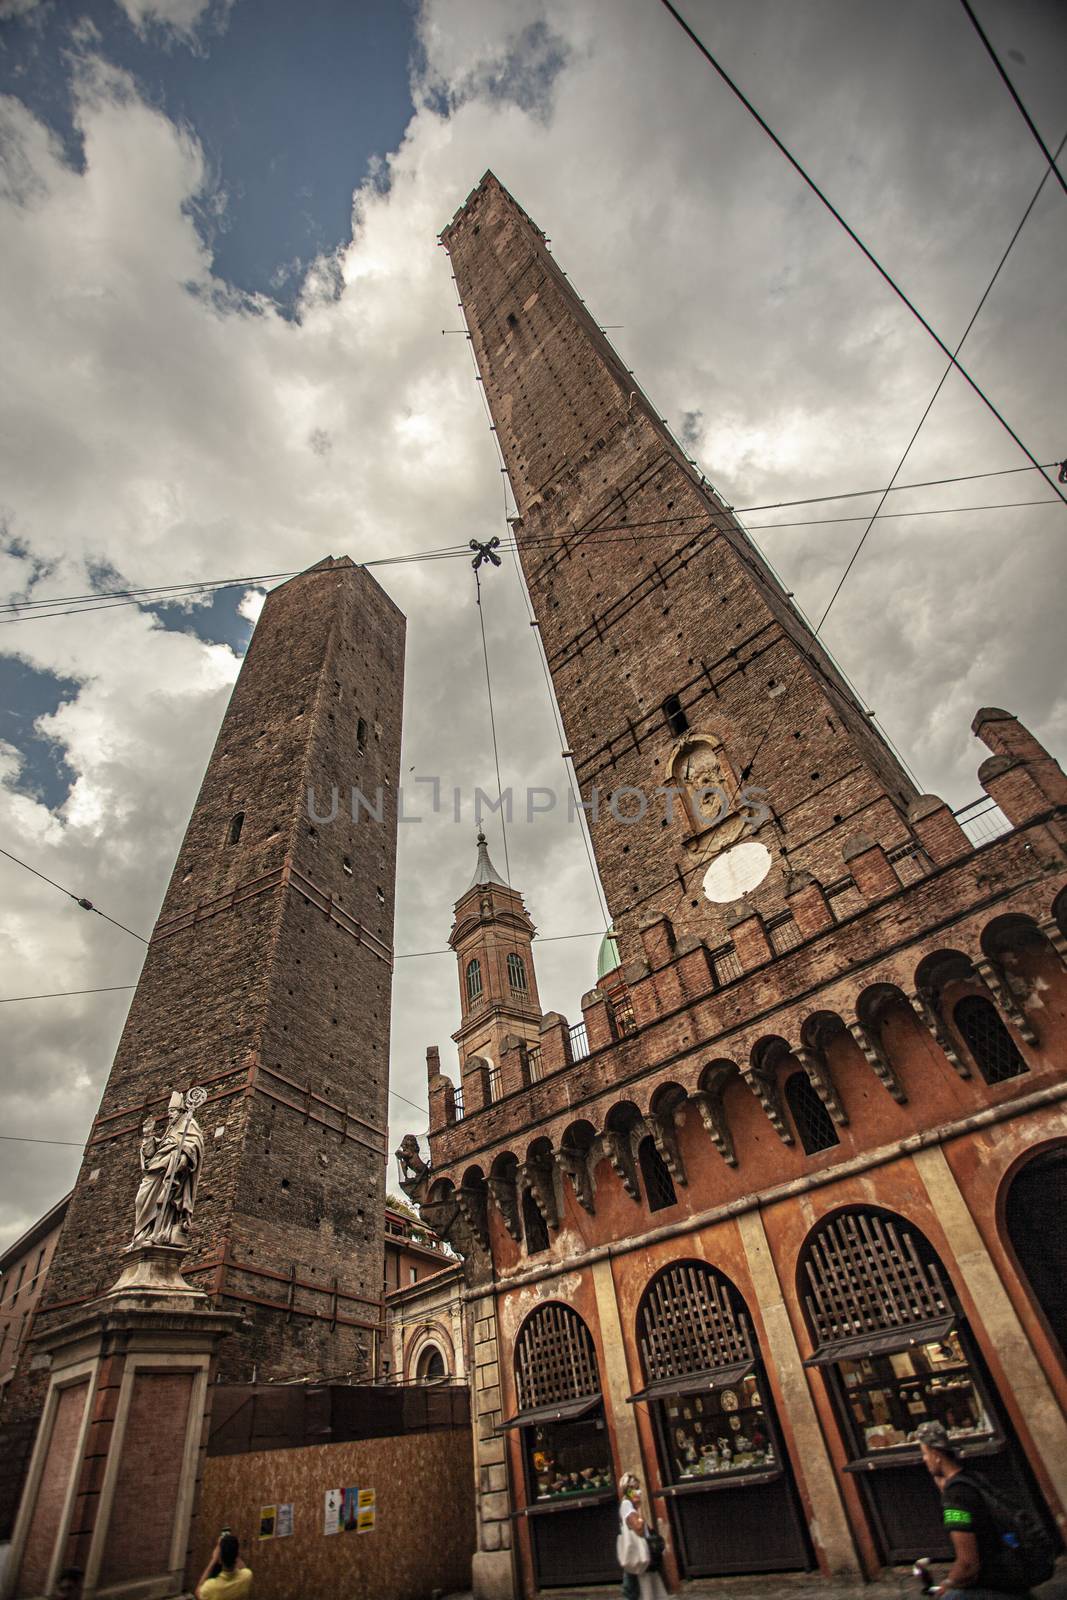 Asinelli tower in Bologna, Italy 9 by pippocarlot